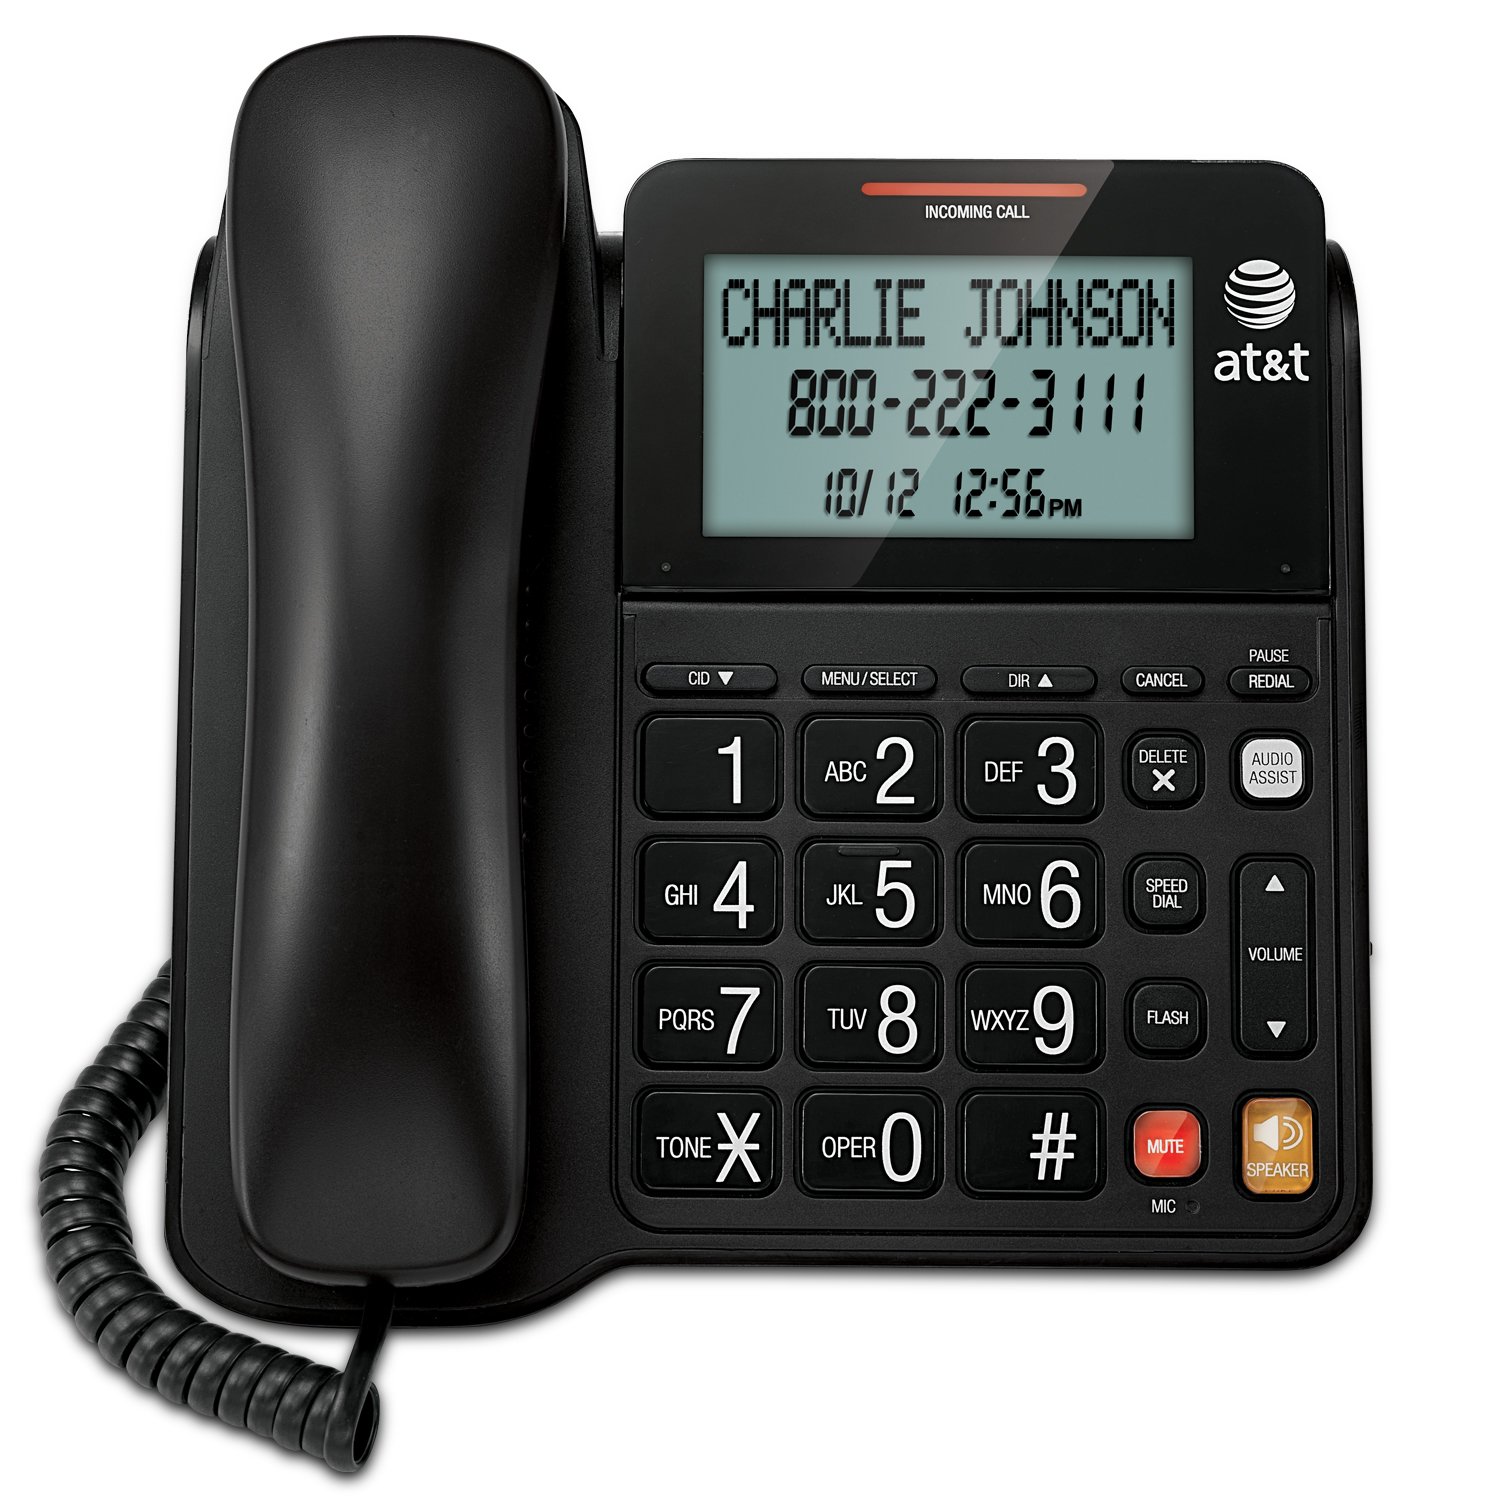 Phone ringing with caller ID displayed